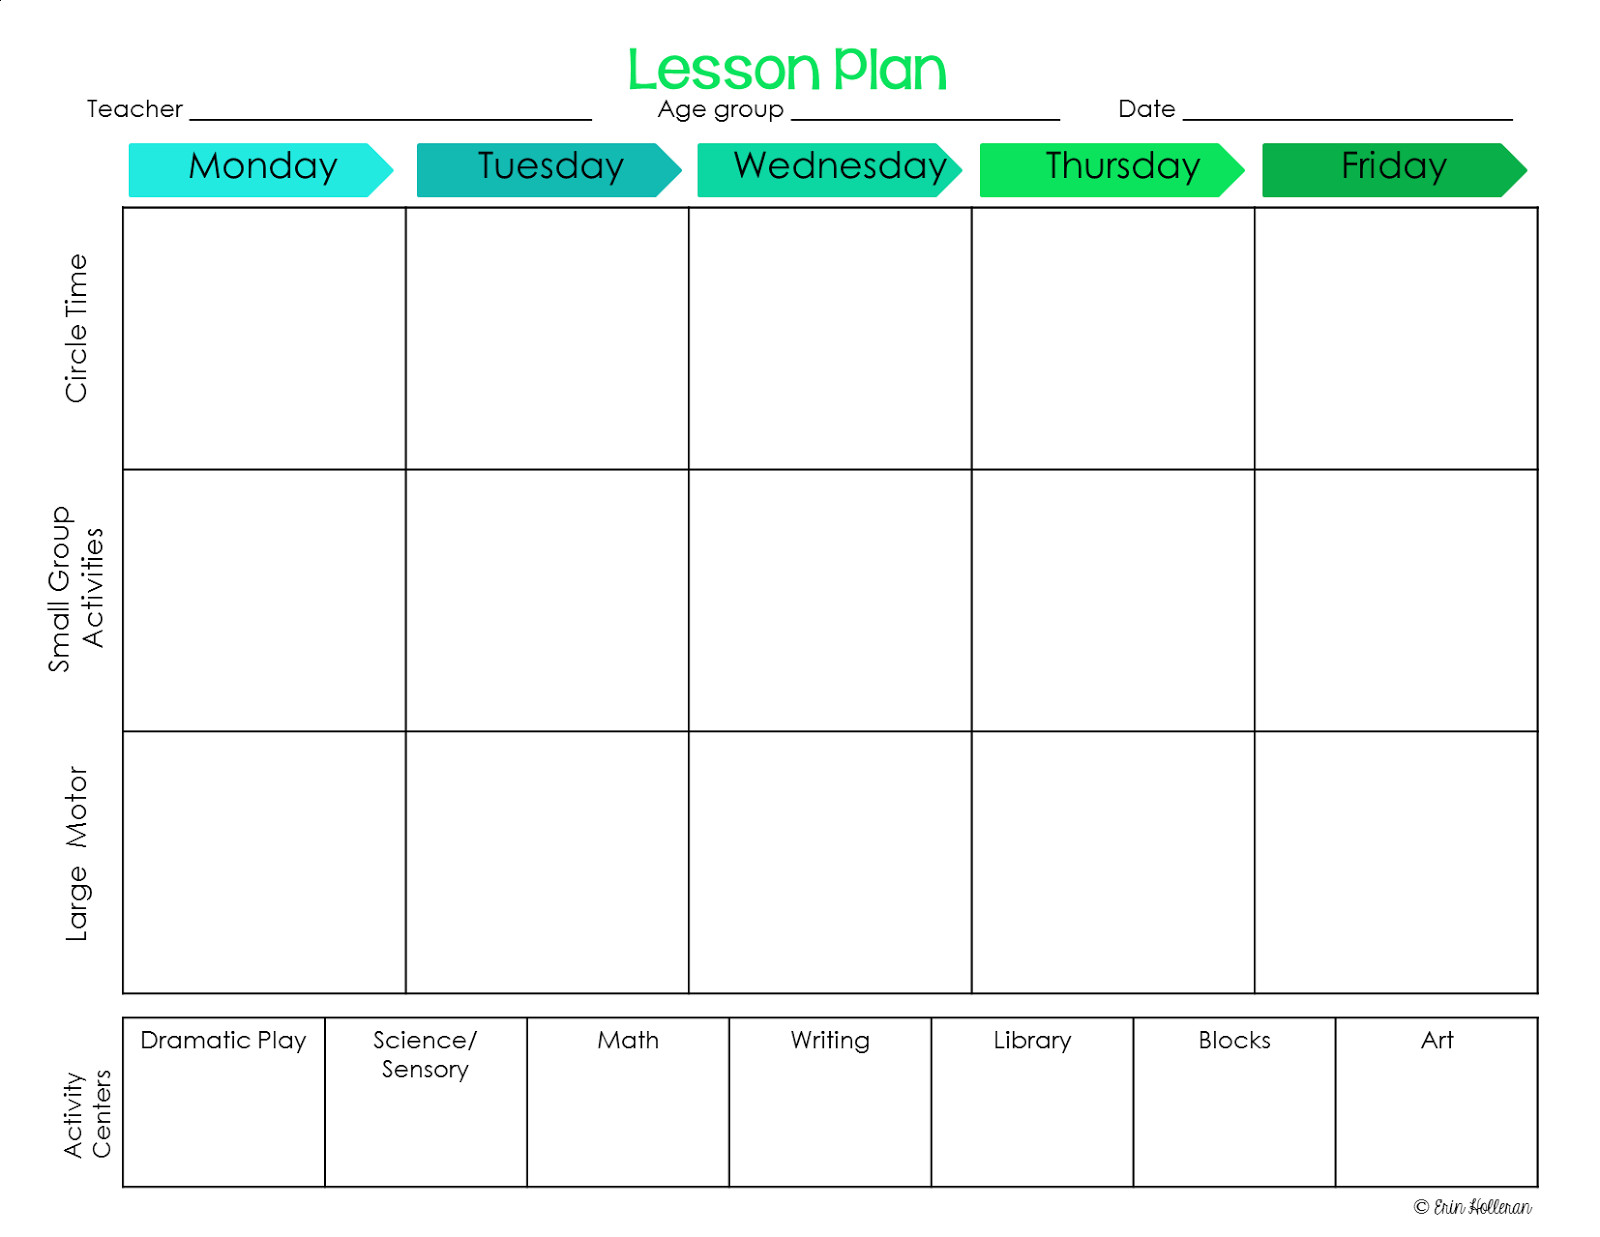 Free Lesson Plan Templates Preschool Ponderings Make Your Lesson Plans Work for You